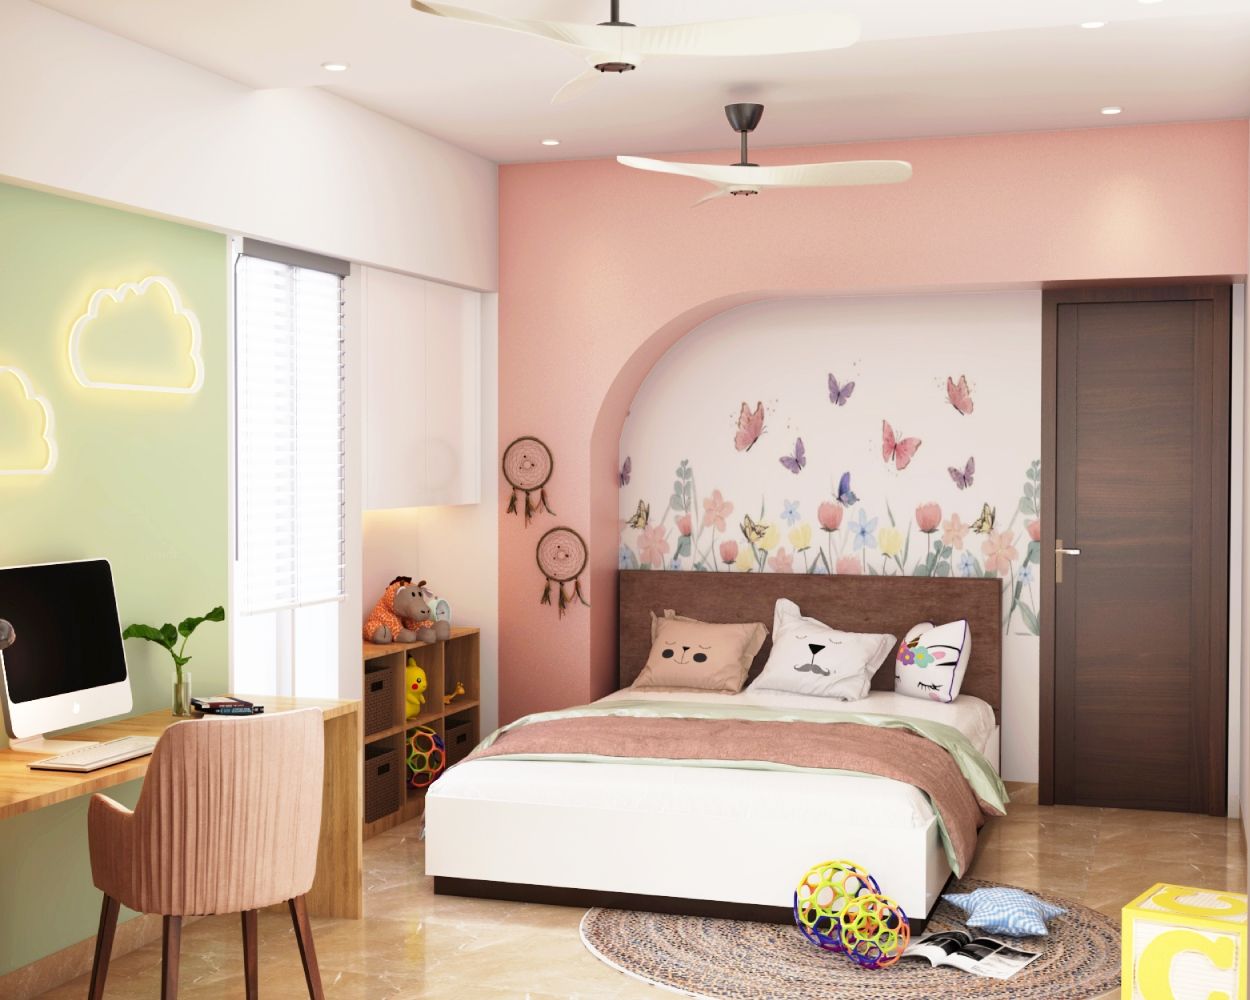 Modern Girls Room Design With Floral Wallpaper And 2-Door Frosted Wardrobe